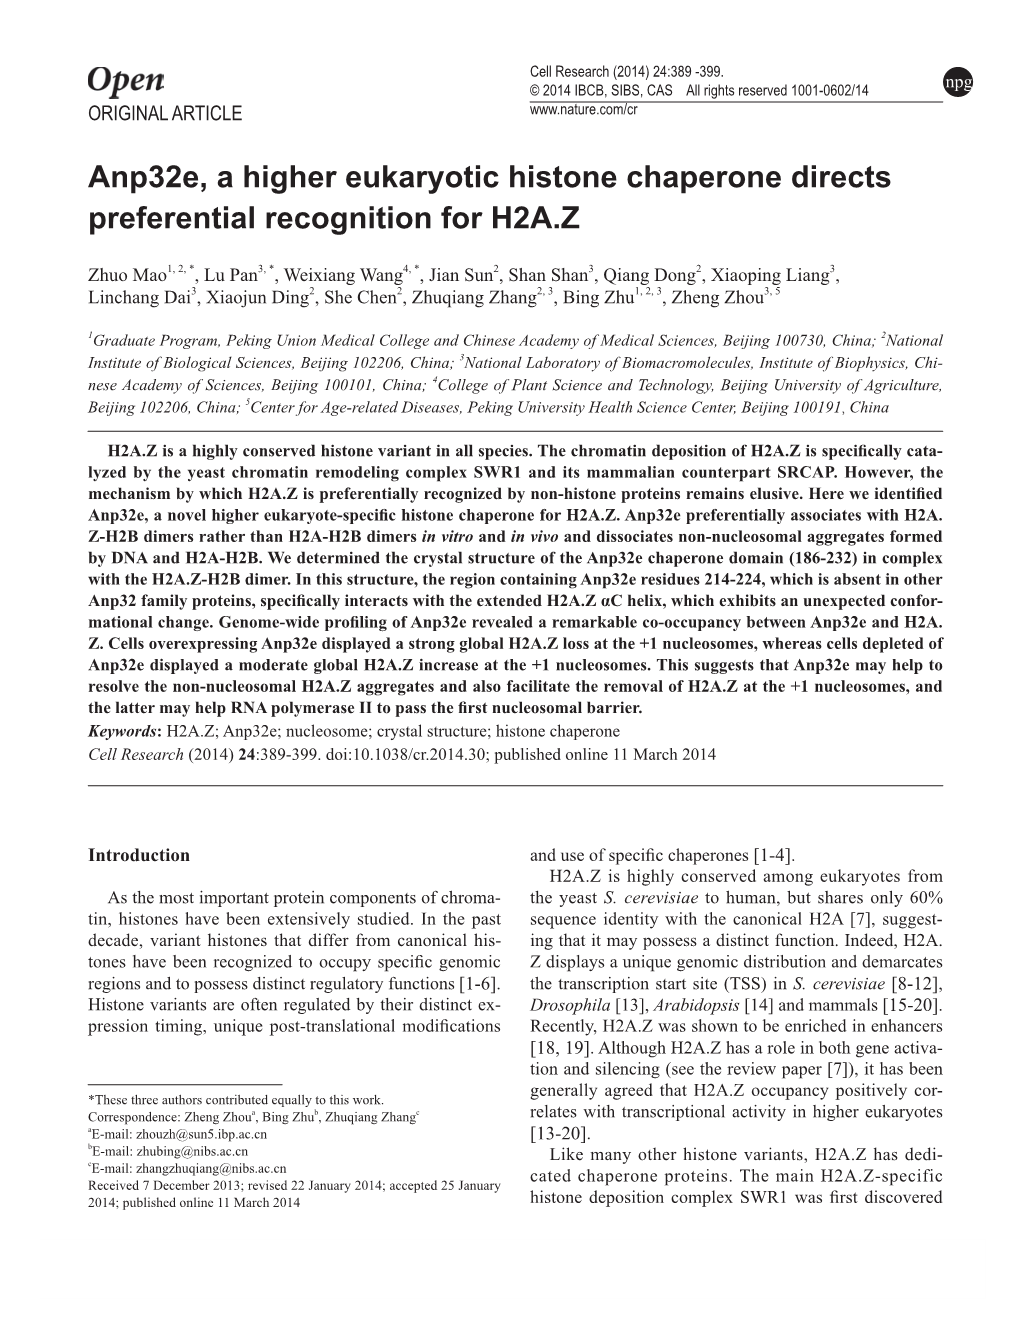 Anp32e, a Higher Eukaryotic Histone Chaperone Directs Preferential Recognition for H2A.Z